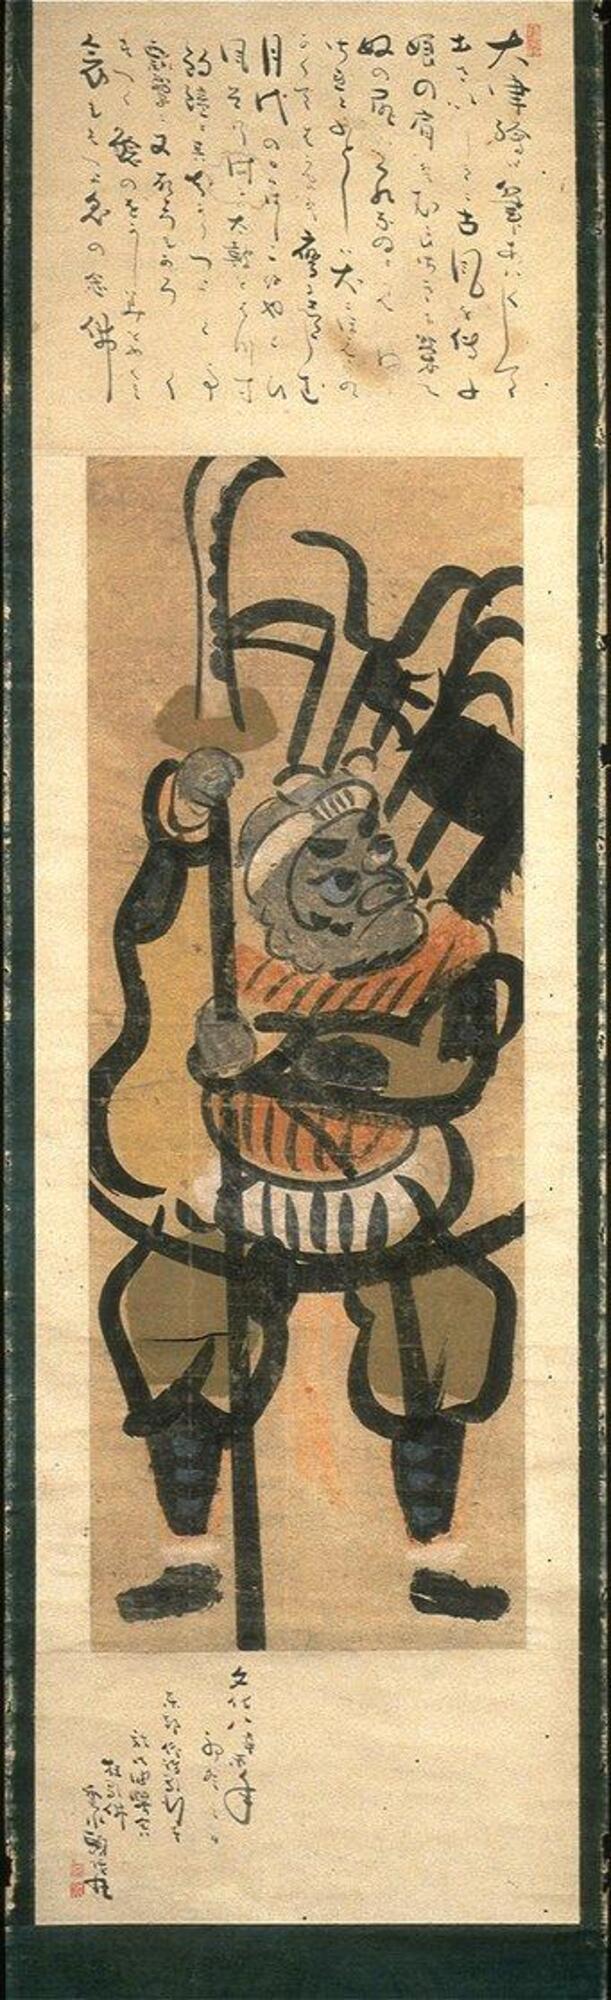 This painting portrays Saito Musashibo Benkei holding a halberd. Benkei was a Japanese warrior monk, a popular subject of Japanese folklore. Here the painting is accompanied by text, which became common on images with moralistic messages poking fun at society.